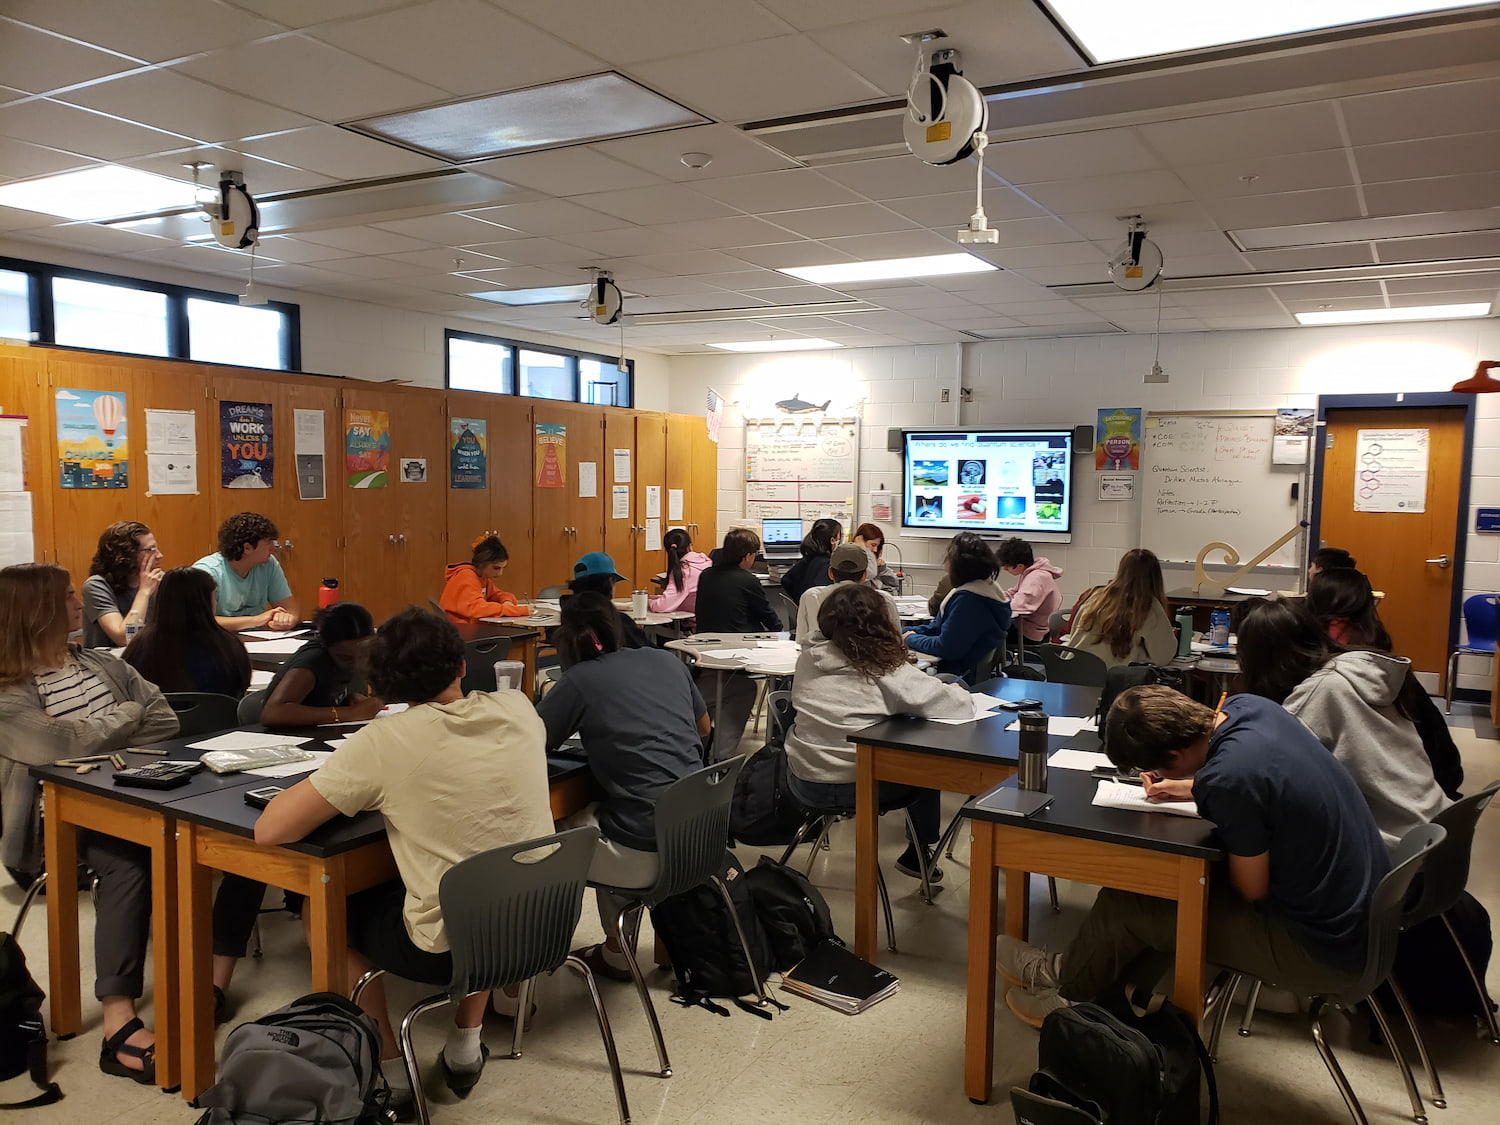 High school students in a classroom watching Prof. Matos Abiague presentation on an electronic board